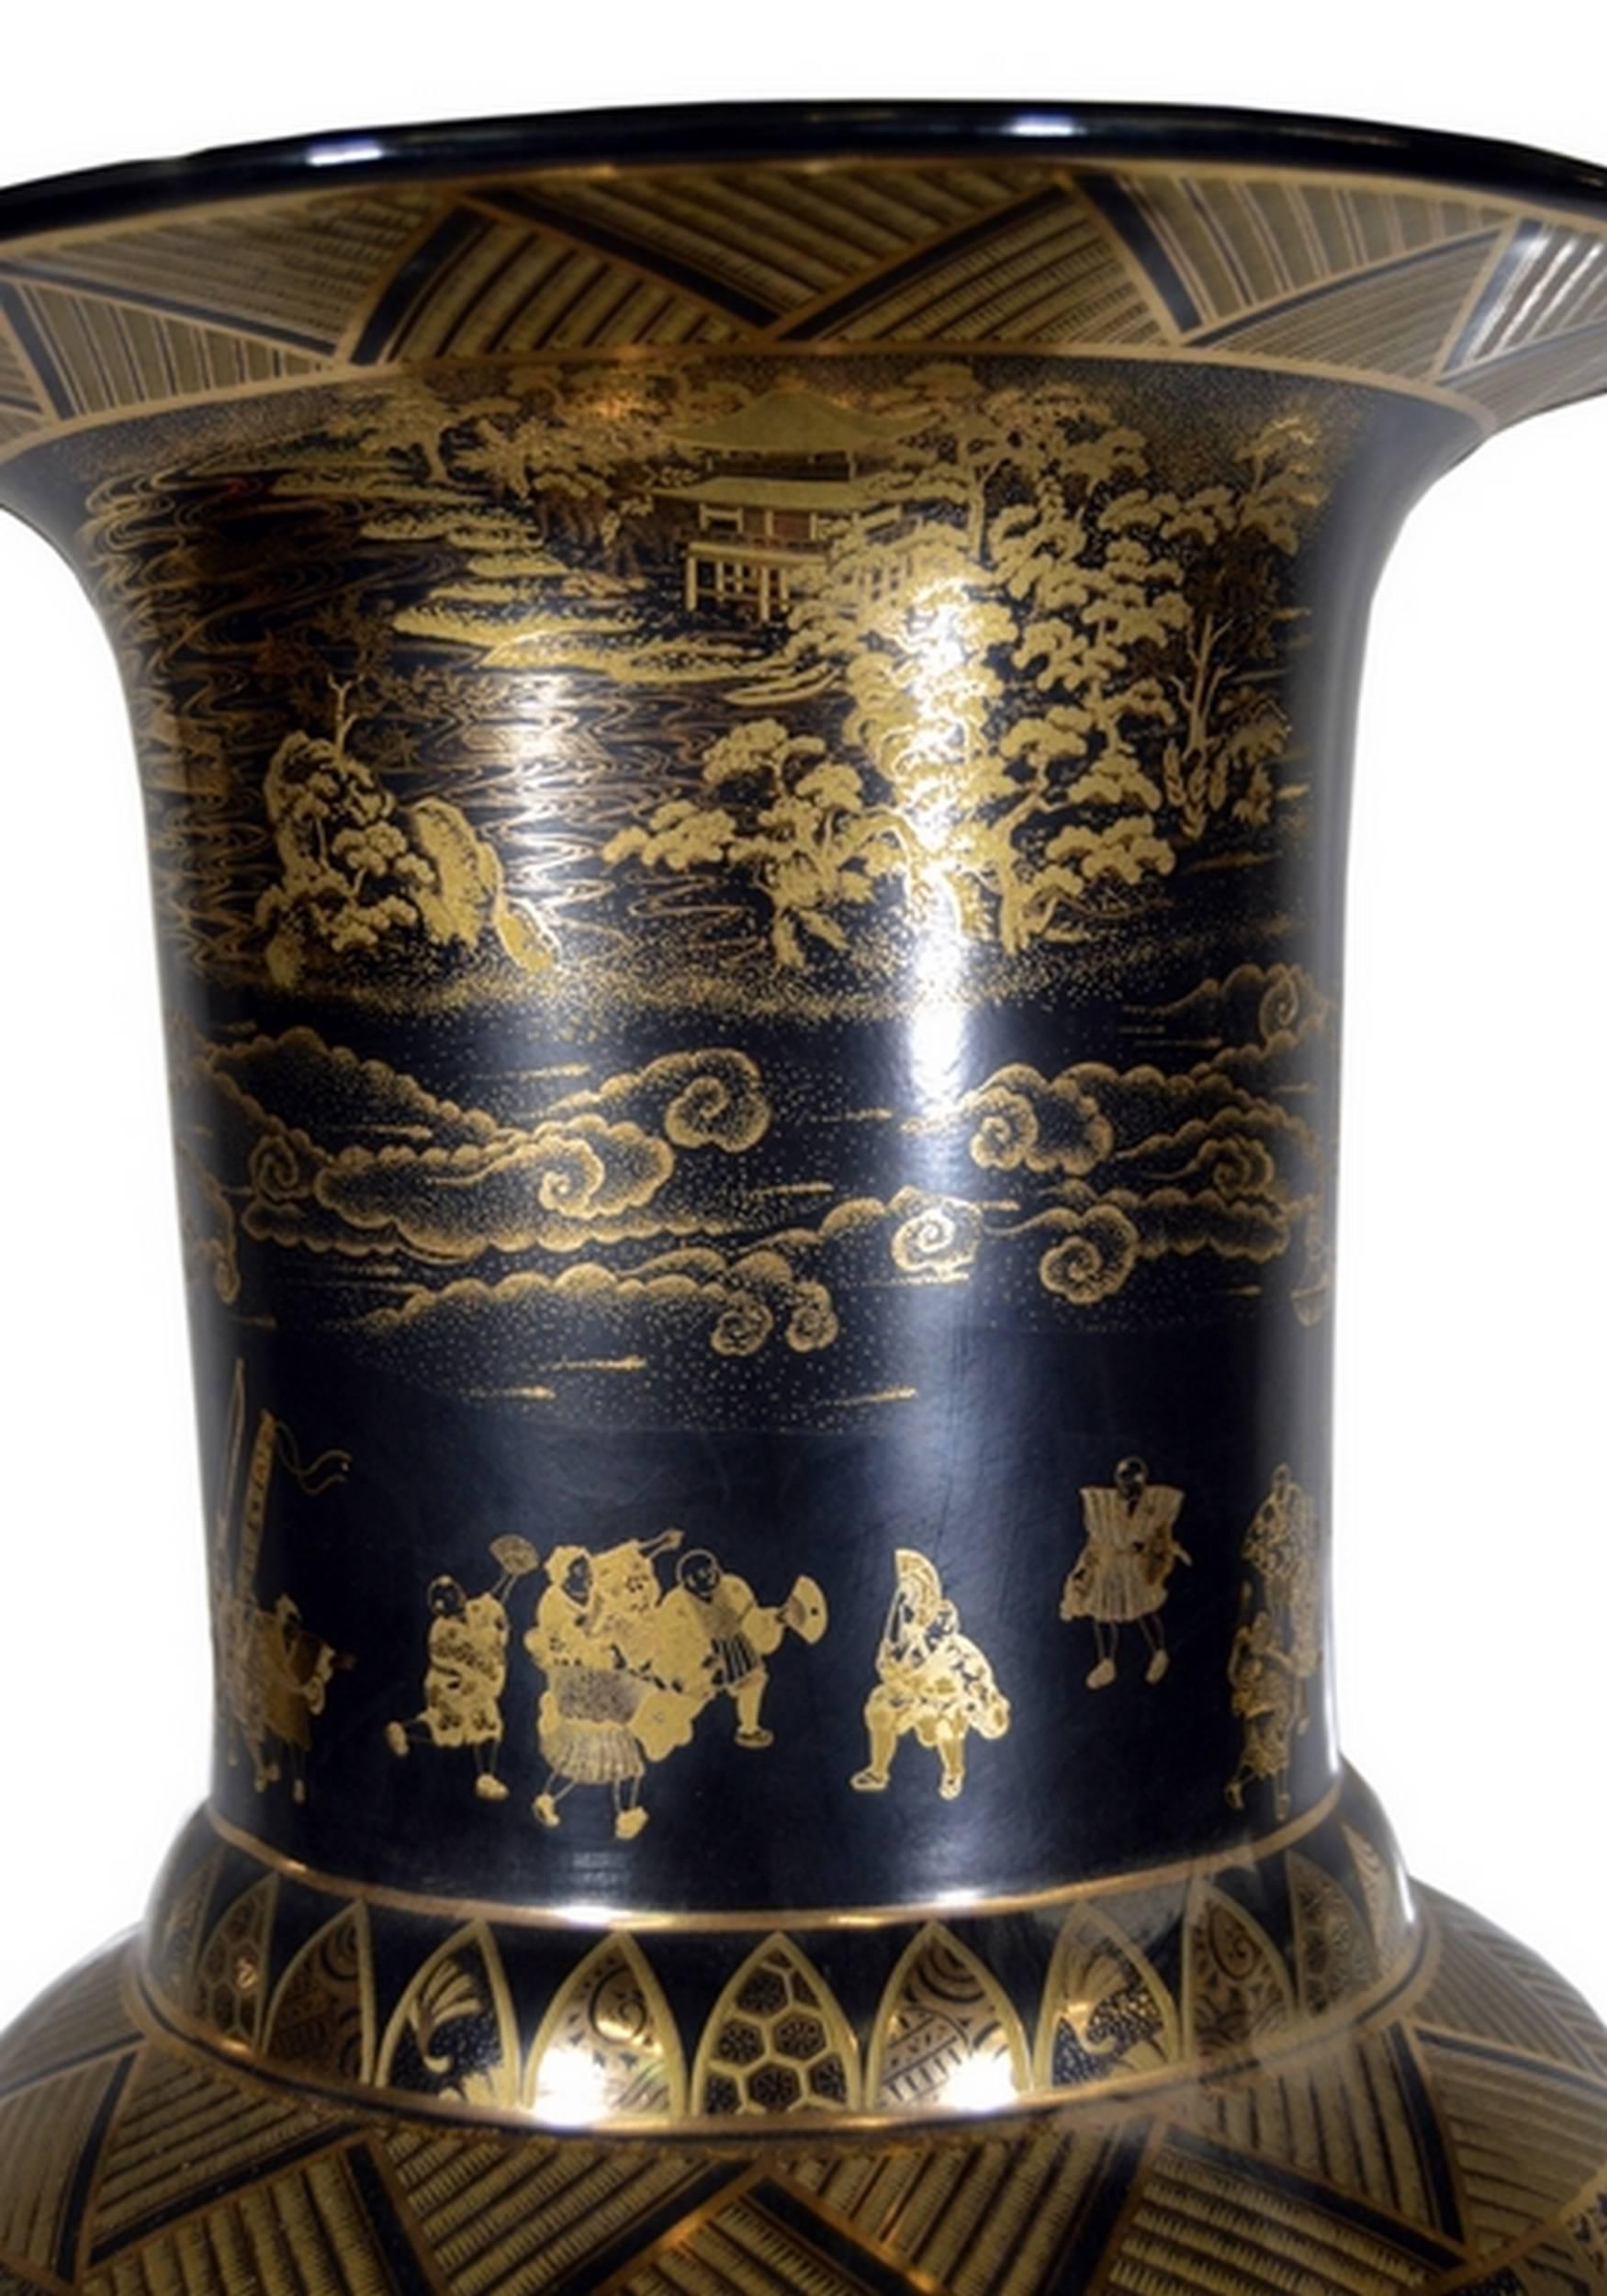 Vintage Black and Golden Hand-Painted Porcelain Vase from China, 20th Century In Excellent Condition For Sale In Yonkers, NY